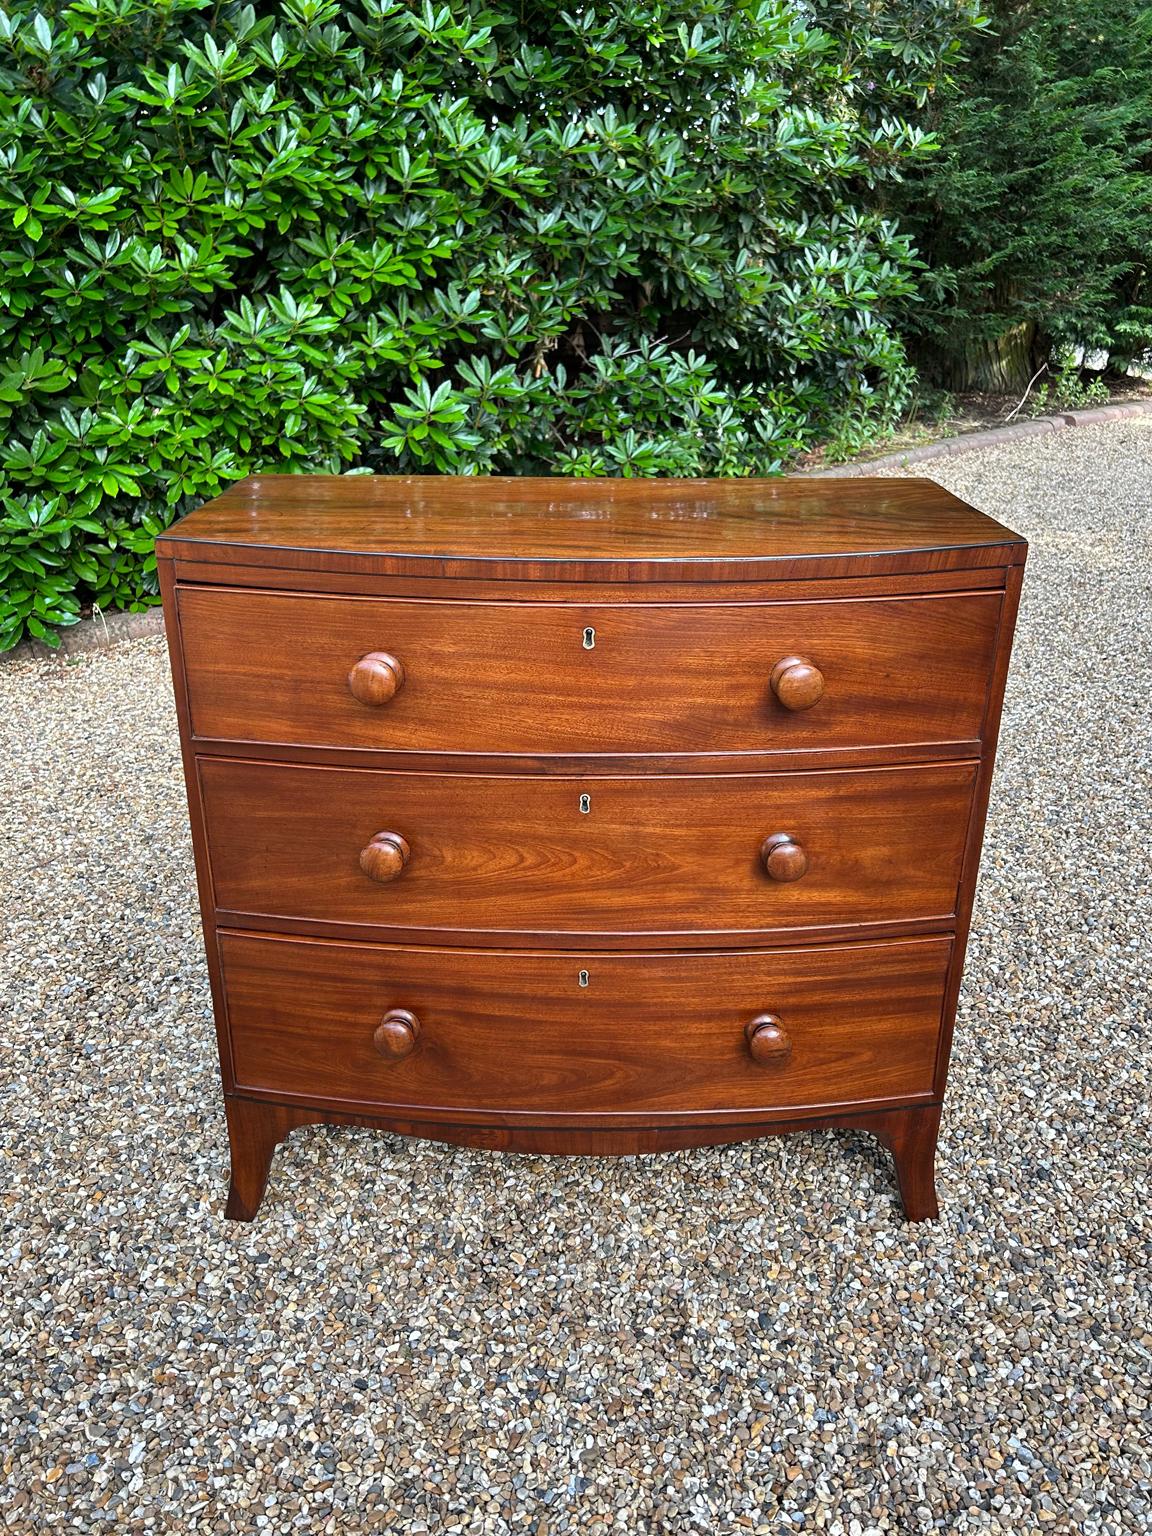 19th Century Georgian / Regency Mahogany Bowfront Chest Of Drawers, with three long graduated oak lined drawers with round turned bun handles, on splayed feet.

Circa: 1820

Dimensions:
Height:  36 inches – 91 cms
Width:   36 inches – 92 cms
Depth: 